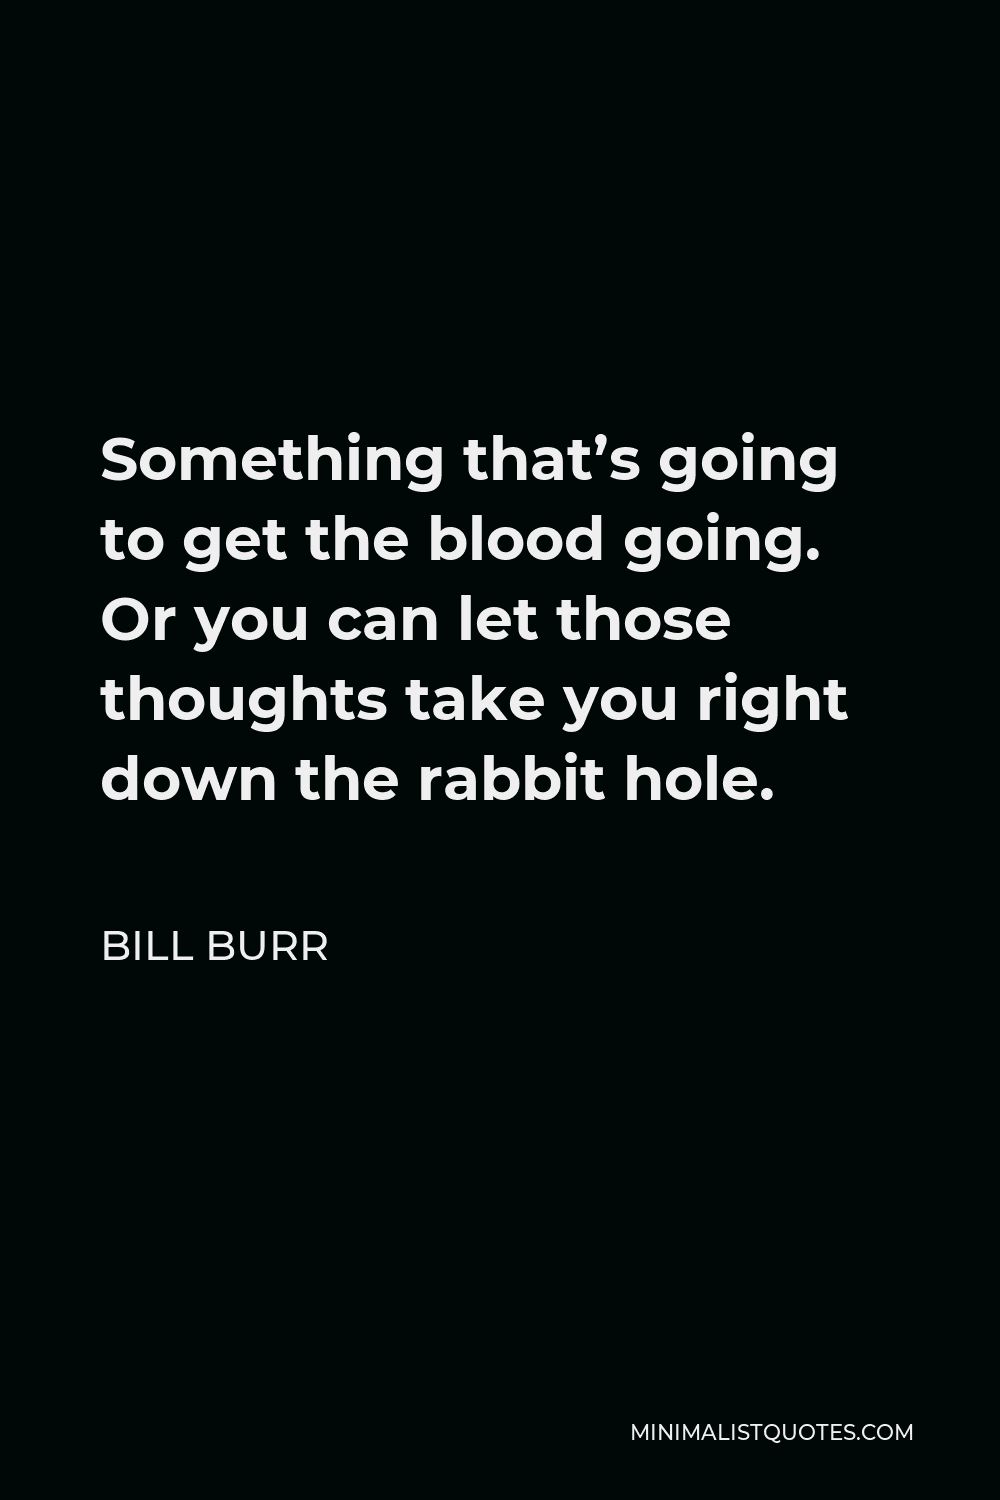 Bill Burr Quote - Something that’s going to get the blood going. Or you can let those thoughts take you right down the rabbit hole.